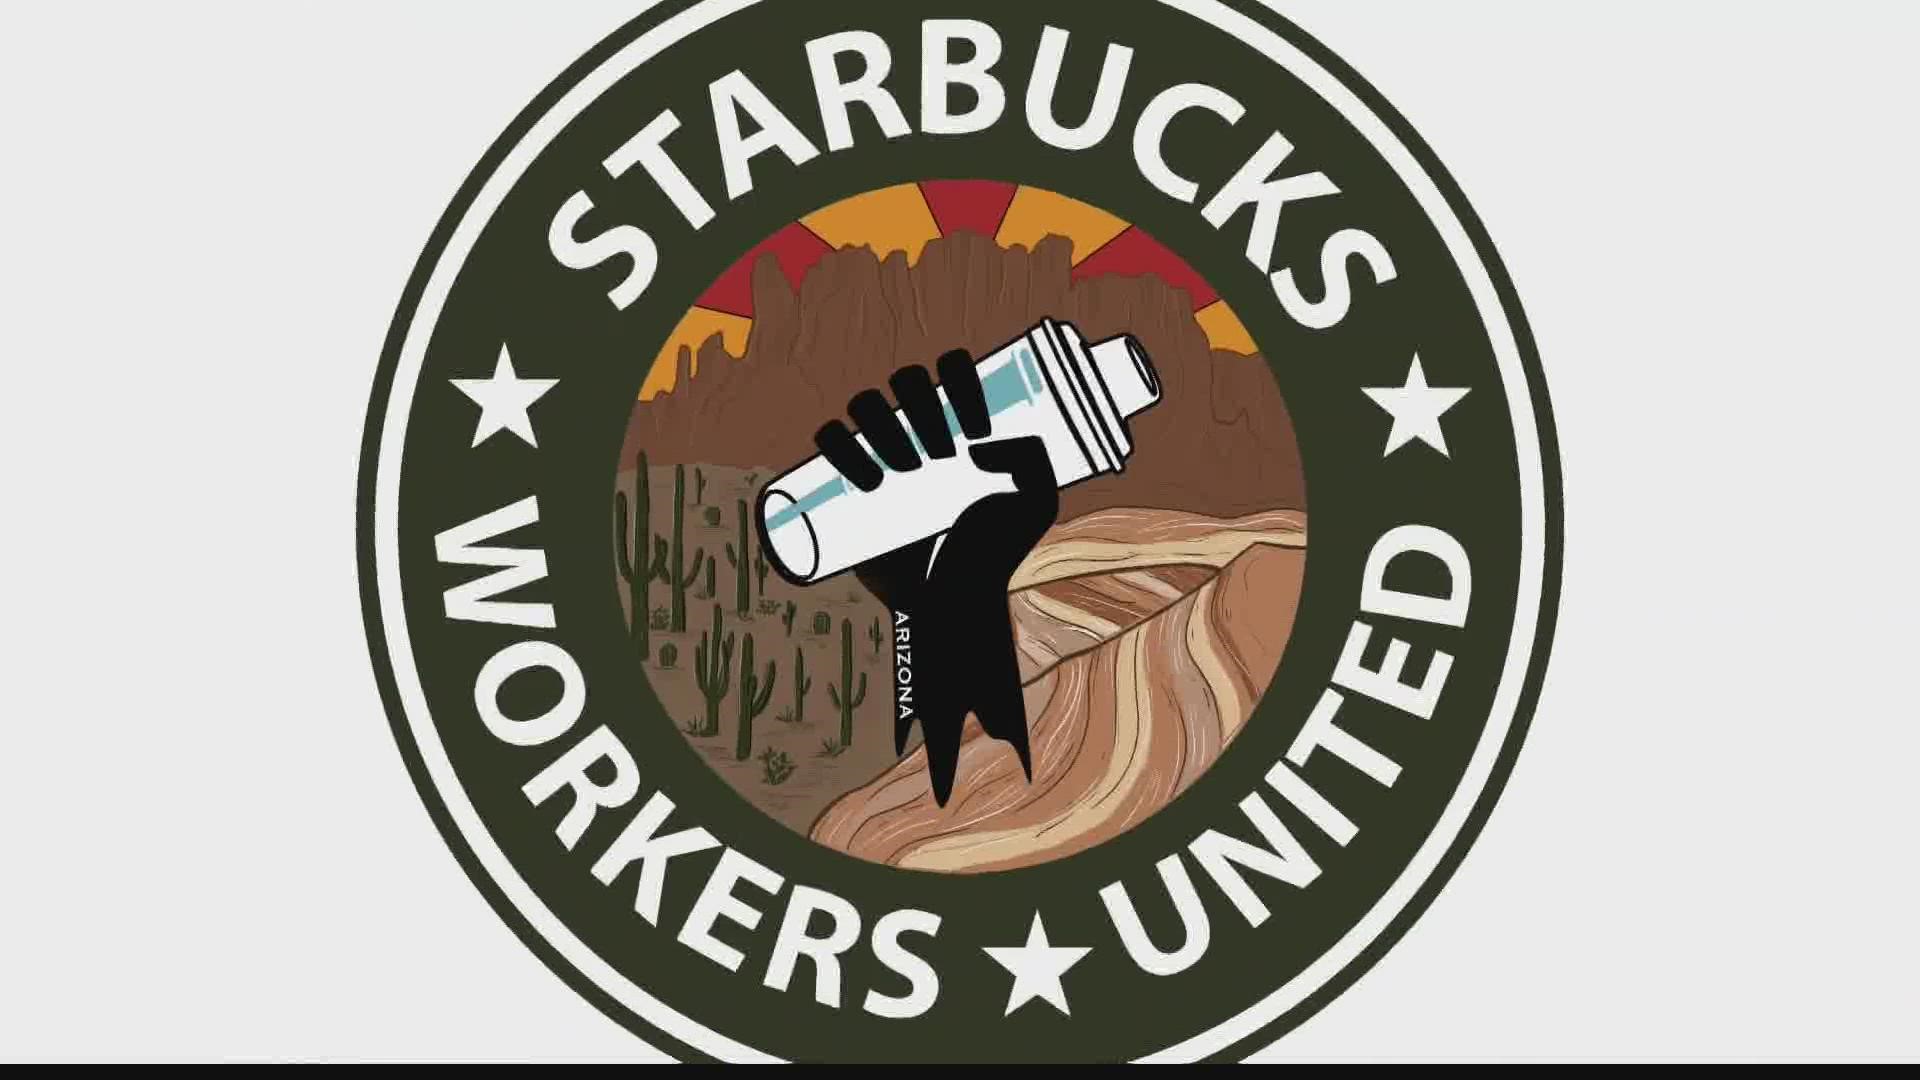 Starbucks employees in Mesa are fighting to unionize and the company is pushing back. The workers are weeks away from voting on whether or not to unionize.